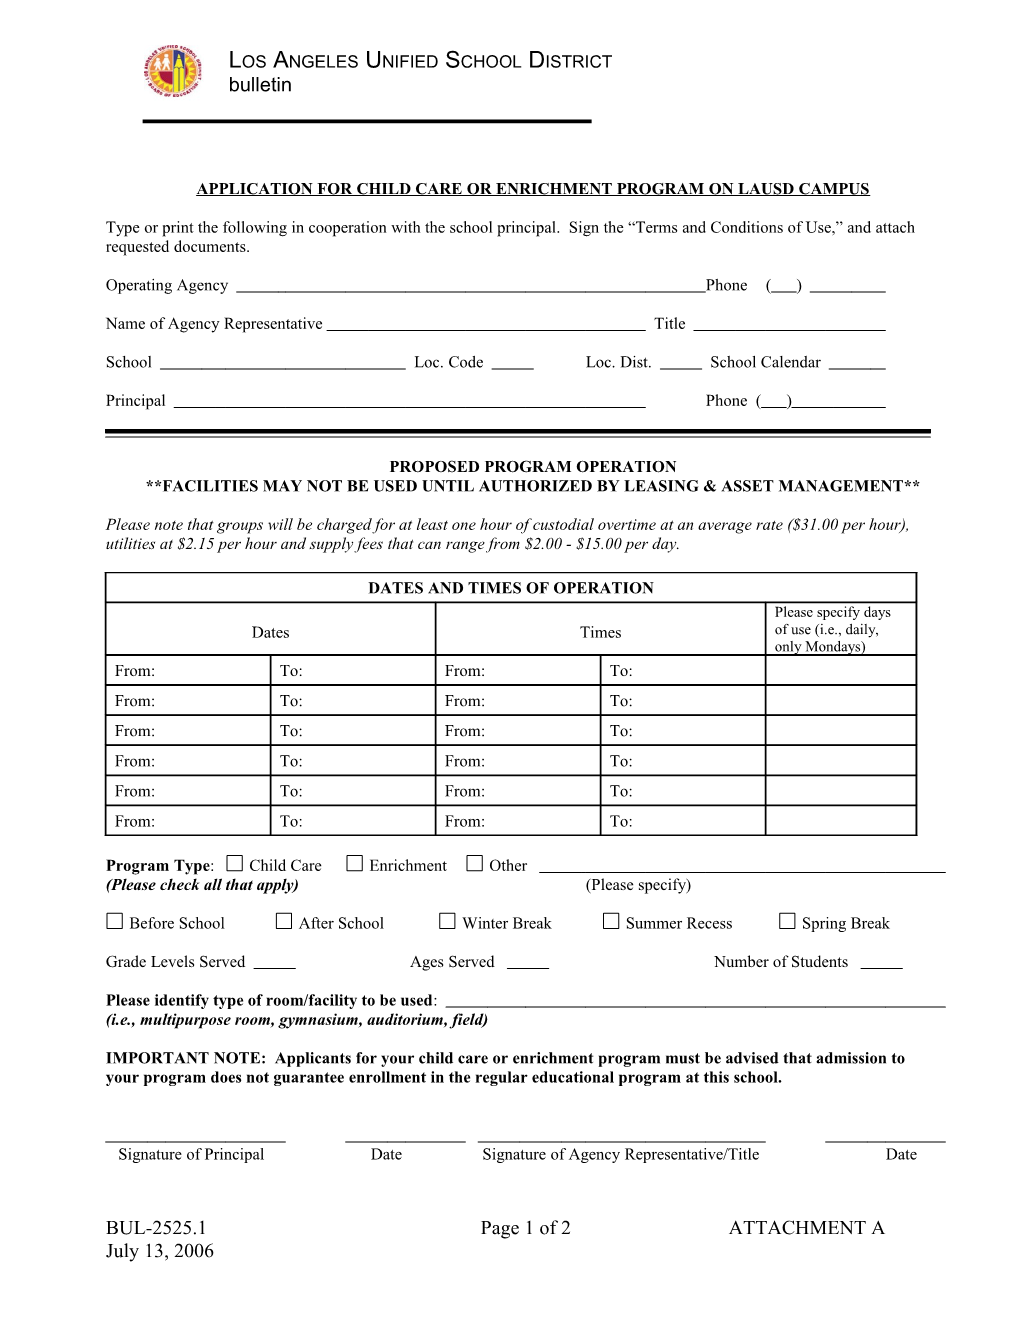 Application for Child Care Or Enrichment Program on Lausd Campus